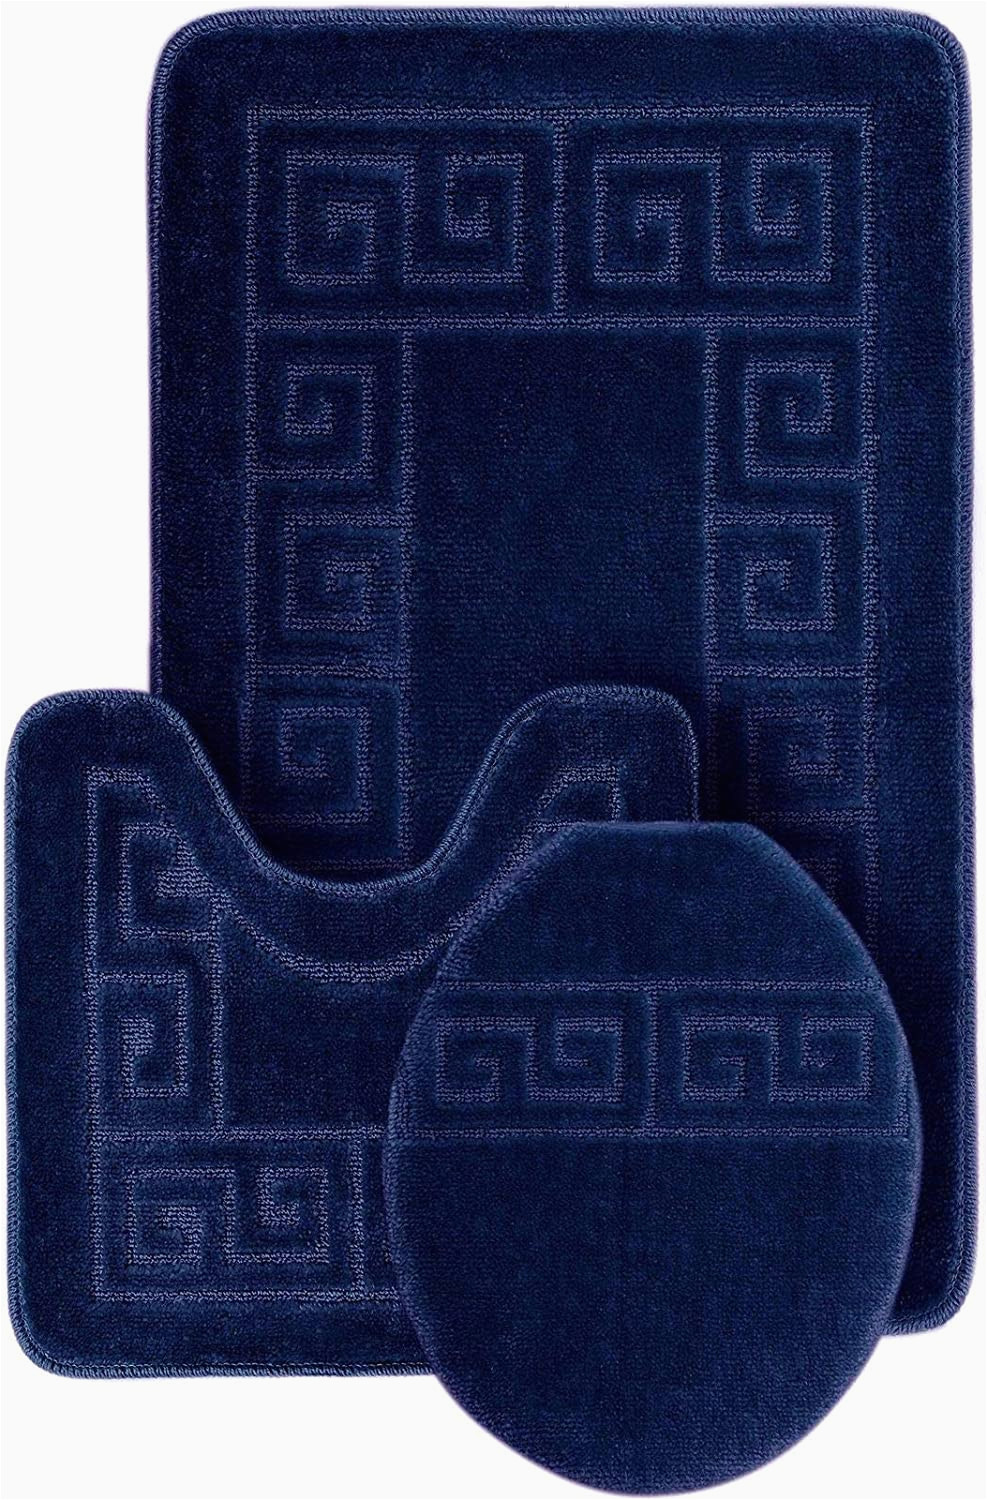 3 Piece Memory Foam Bath Rug Set Wpm World Products Mart Bathroom Rugs Set 3 Piece Bath Pattern Rug 20×32 Large Contour Mats 20×20 with Lid Cover Navy